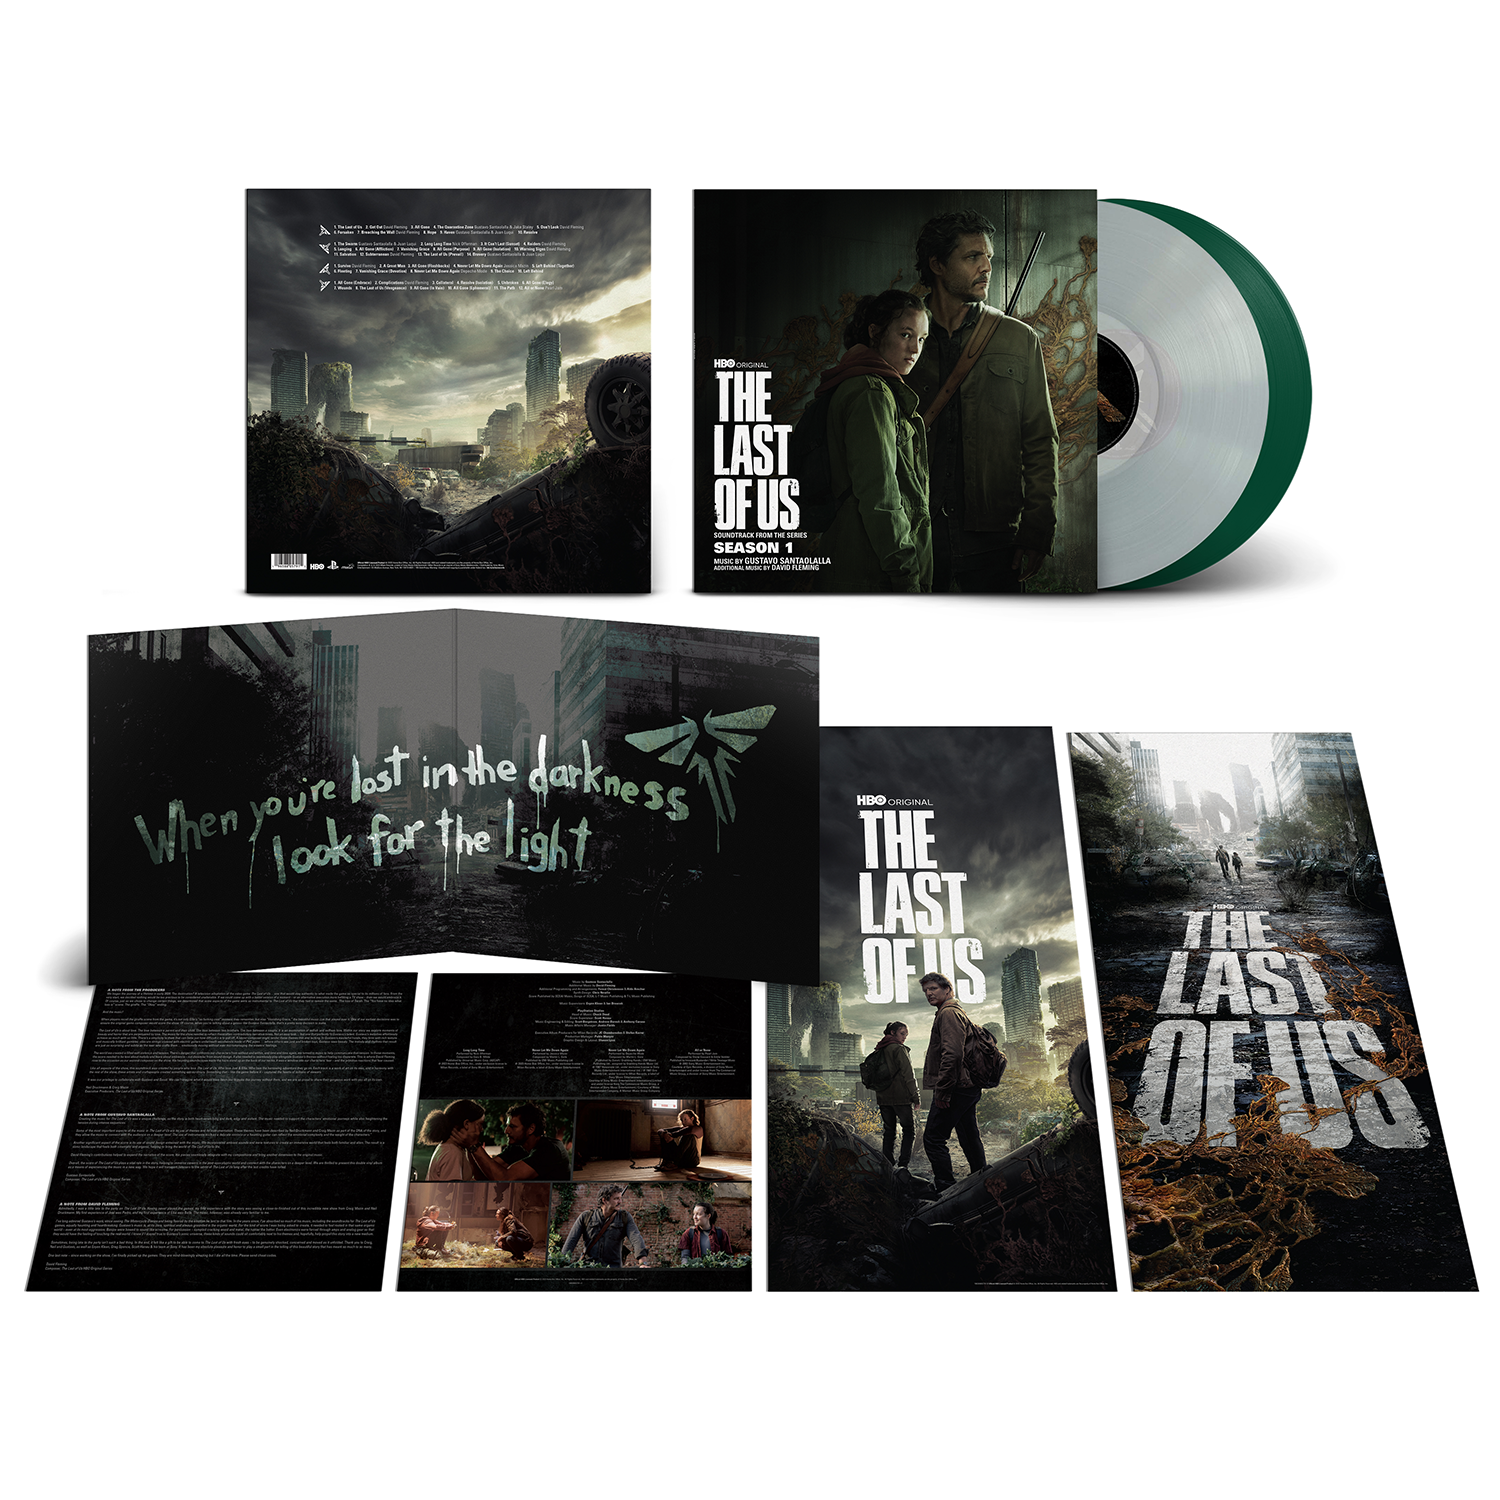 The Last of Us - Season 1 (Soundtrack from the HBO Original Series): Limited Green + Clear Vinyl 2LP